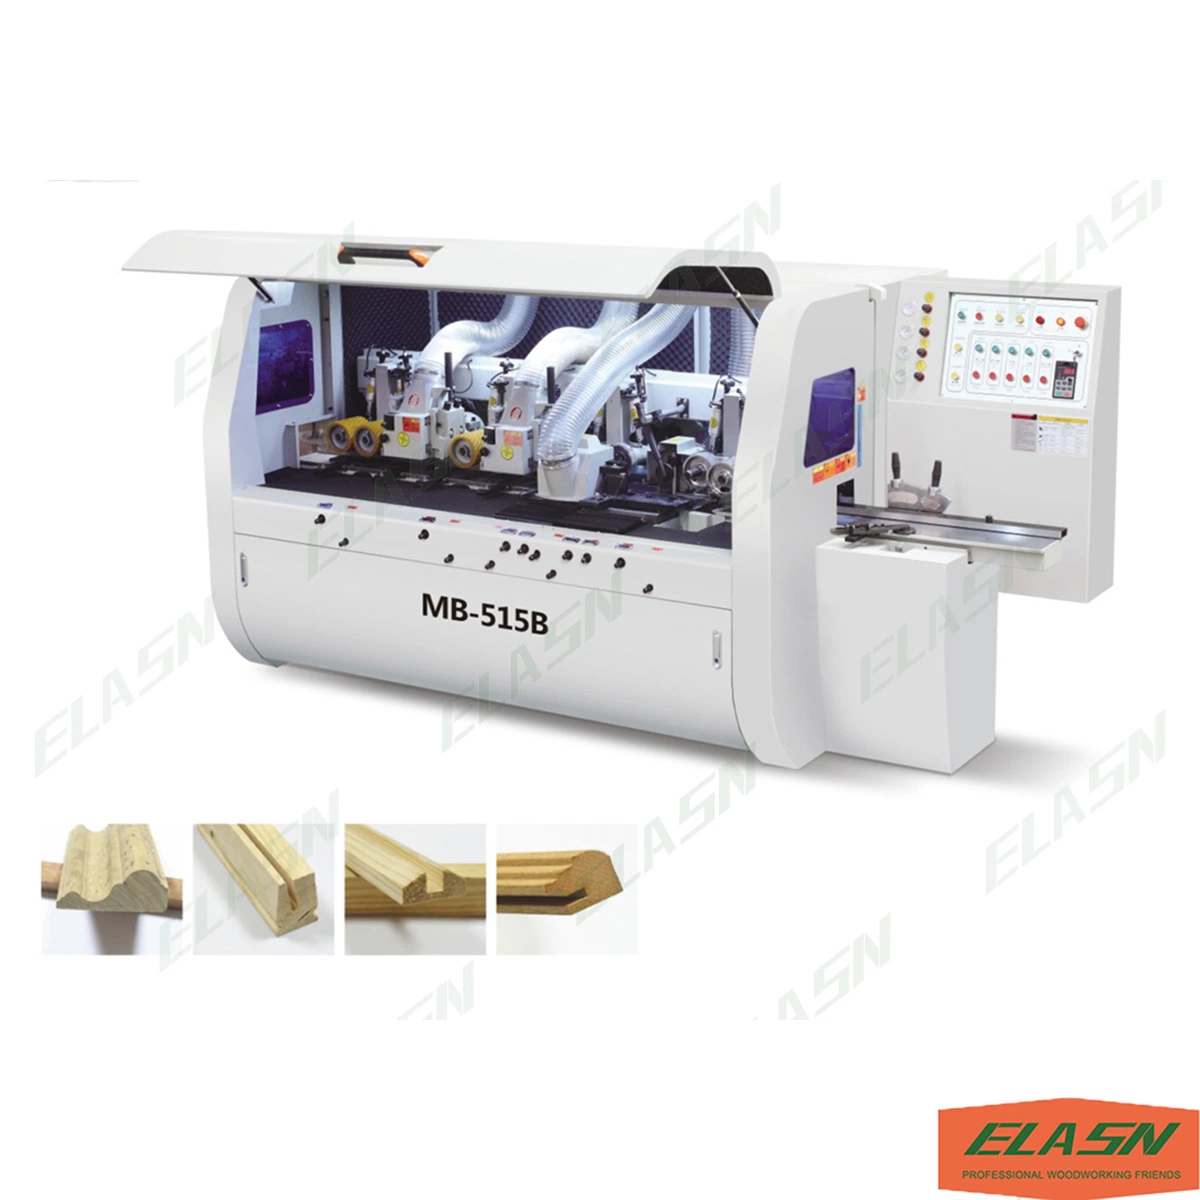 Industrial Woodworking 4 Side Wood Planer Six Spindle Heads Four Sided Moulder Machine Spindle Thicknesser Wood Planer Machine